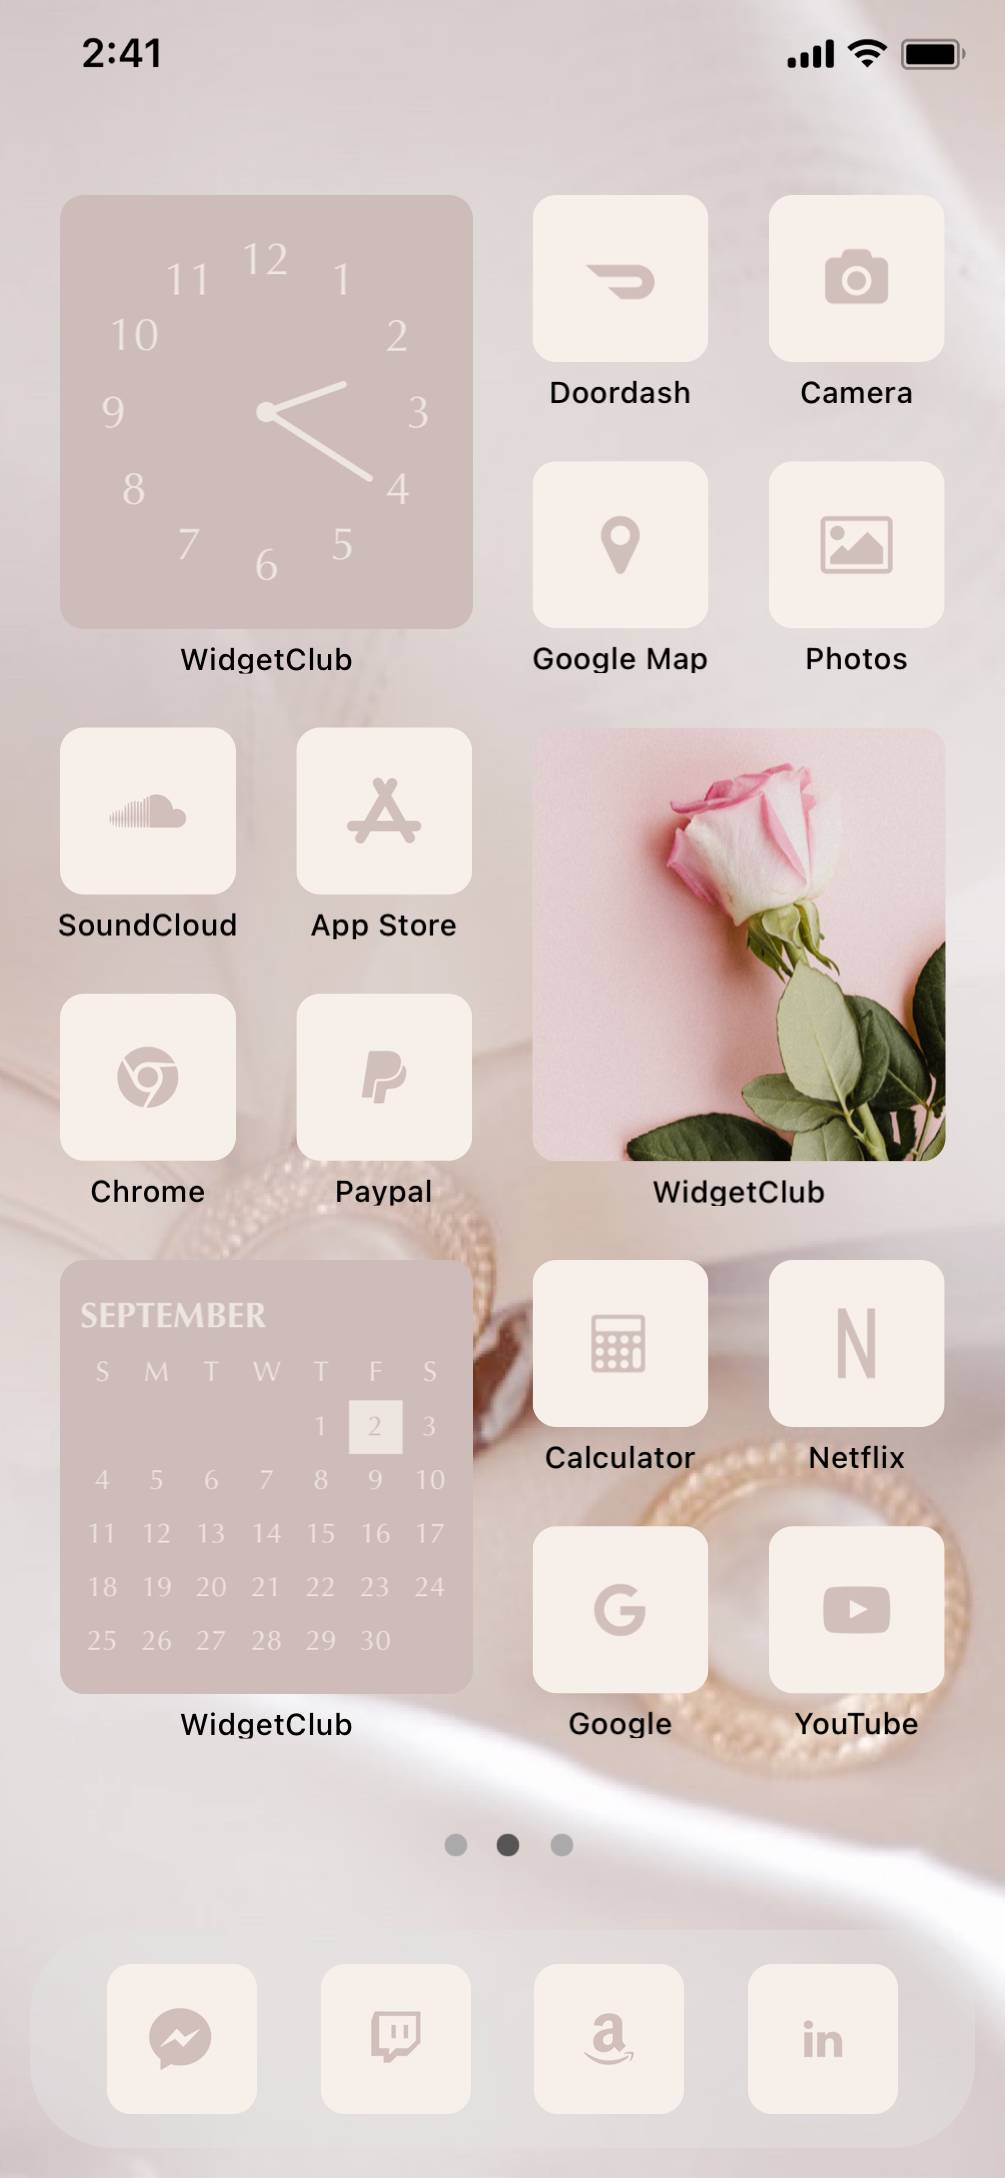 Powder pink templeteHome Screen ideas